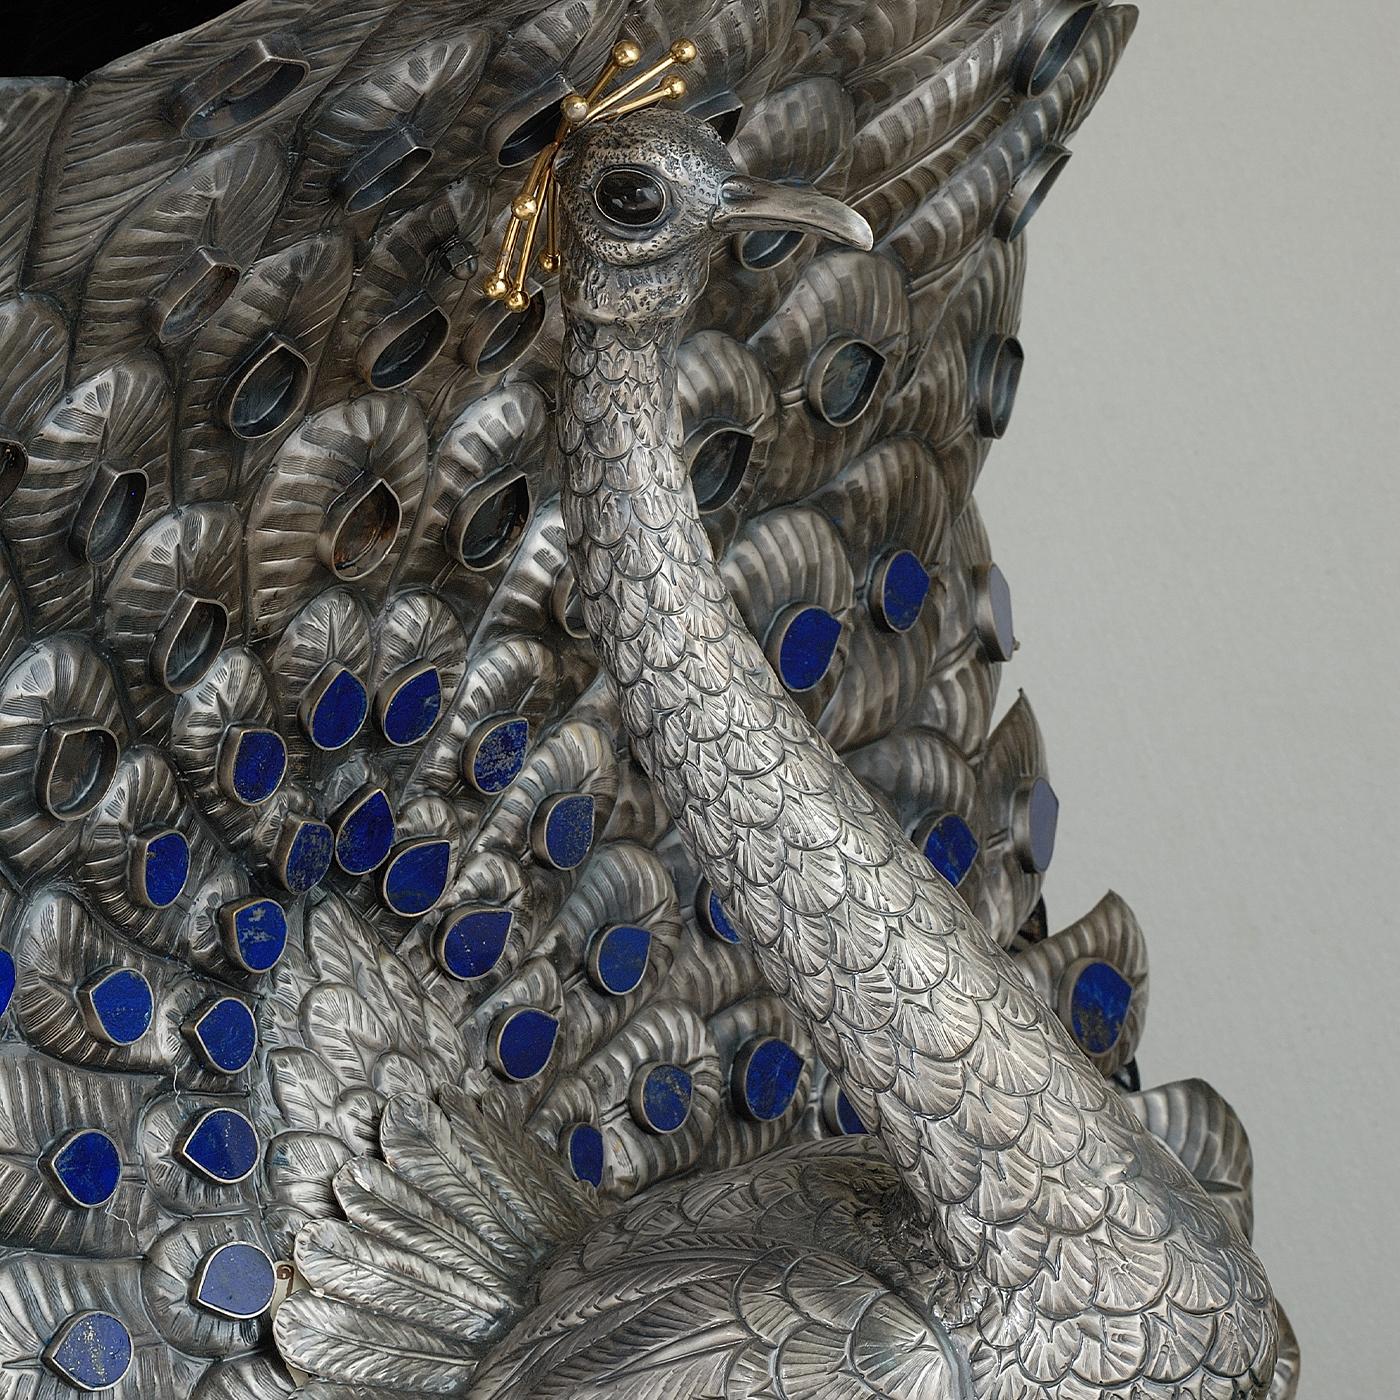 This piece is not merely a table but a work of art. A large, smooth black tabletop rests on what is more a sculpture than a table base formed by two back-to-back peacocks in antiqued silver and with blue lapis used as eyespots on the wings. The